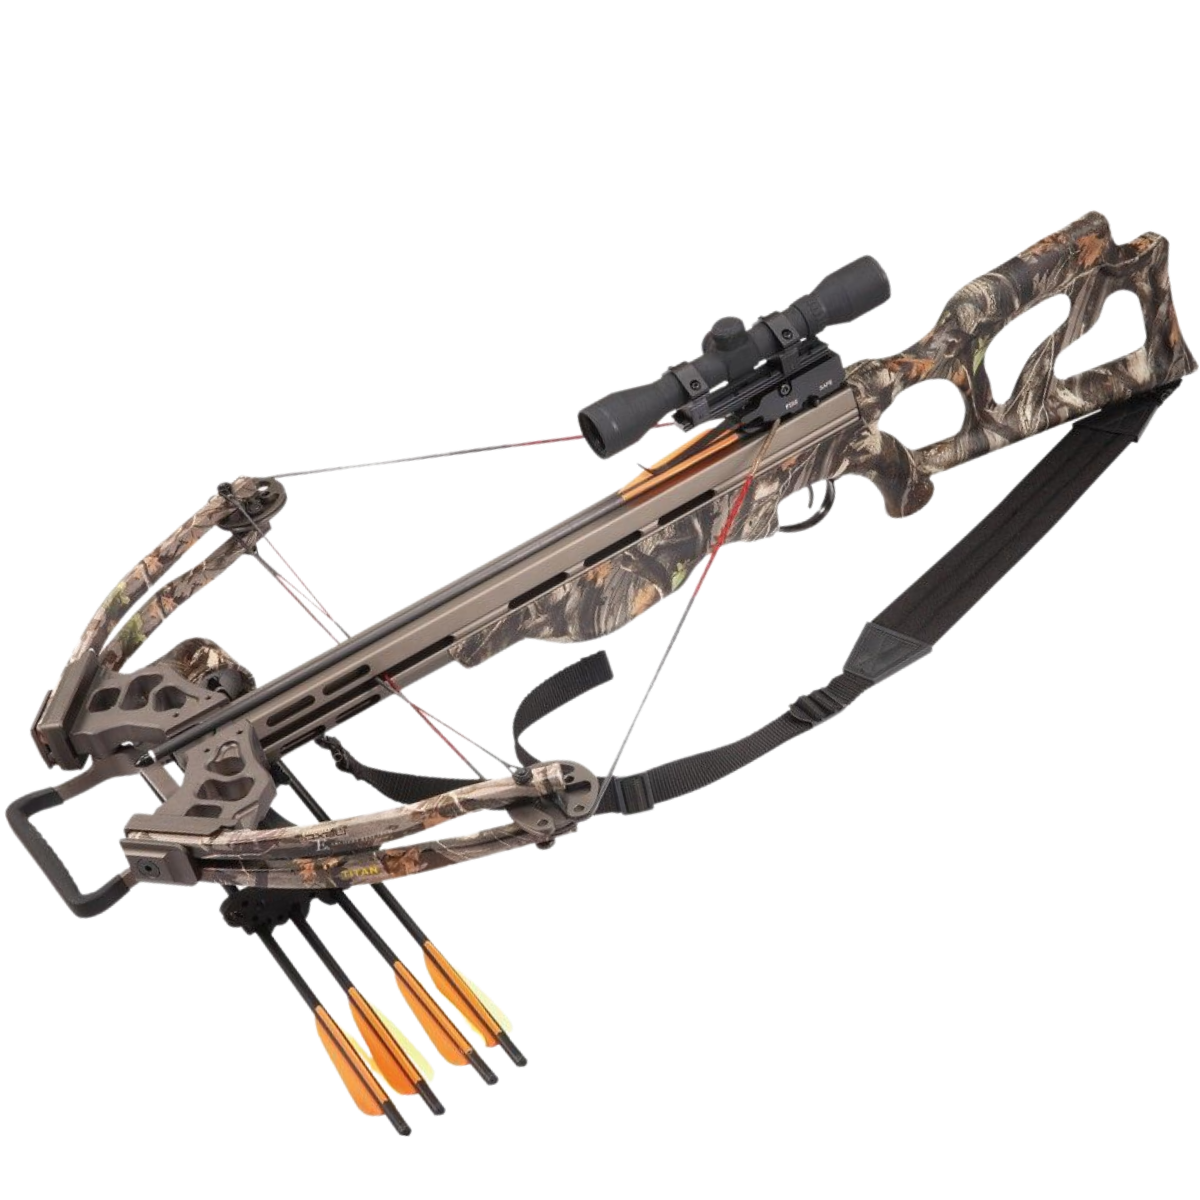 EK Archery Titan Compound Crossbow Package 385fps - Fast UK Shipping | Tactical Archery UK